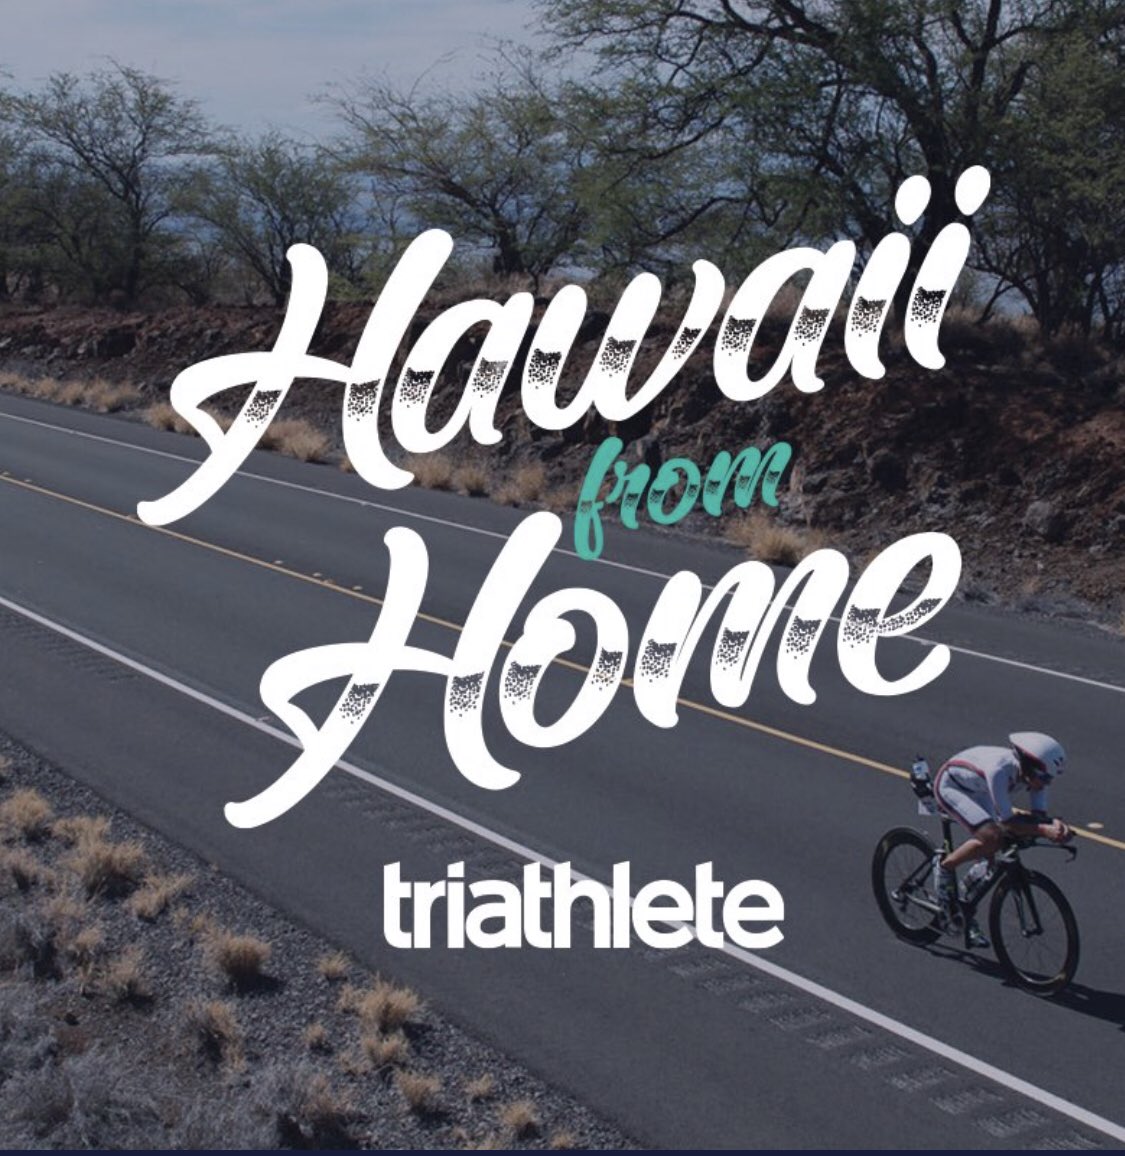 Fist leg of full IronMan distance race throughout this week.
#HawaiifromHome